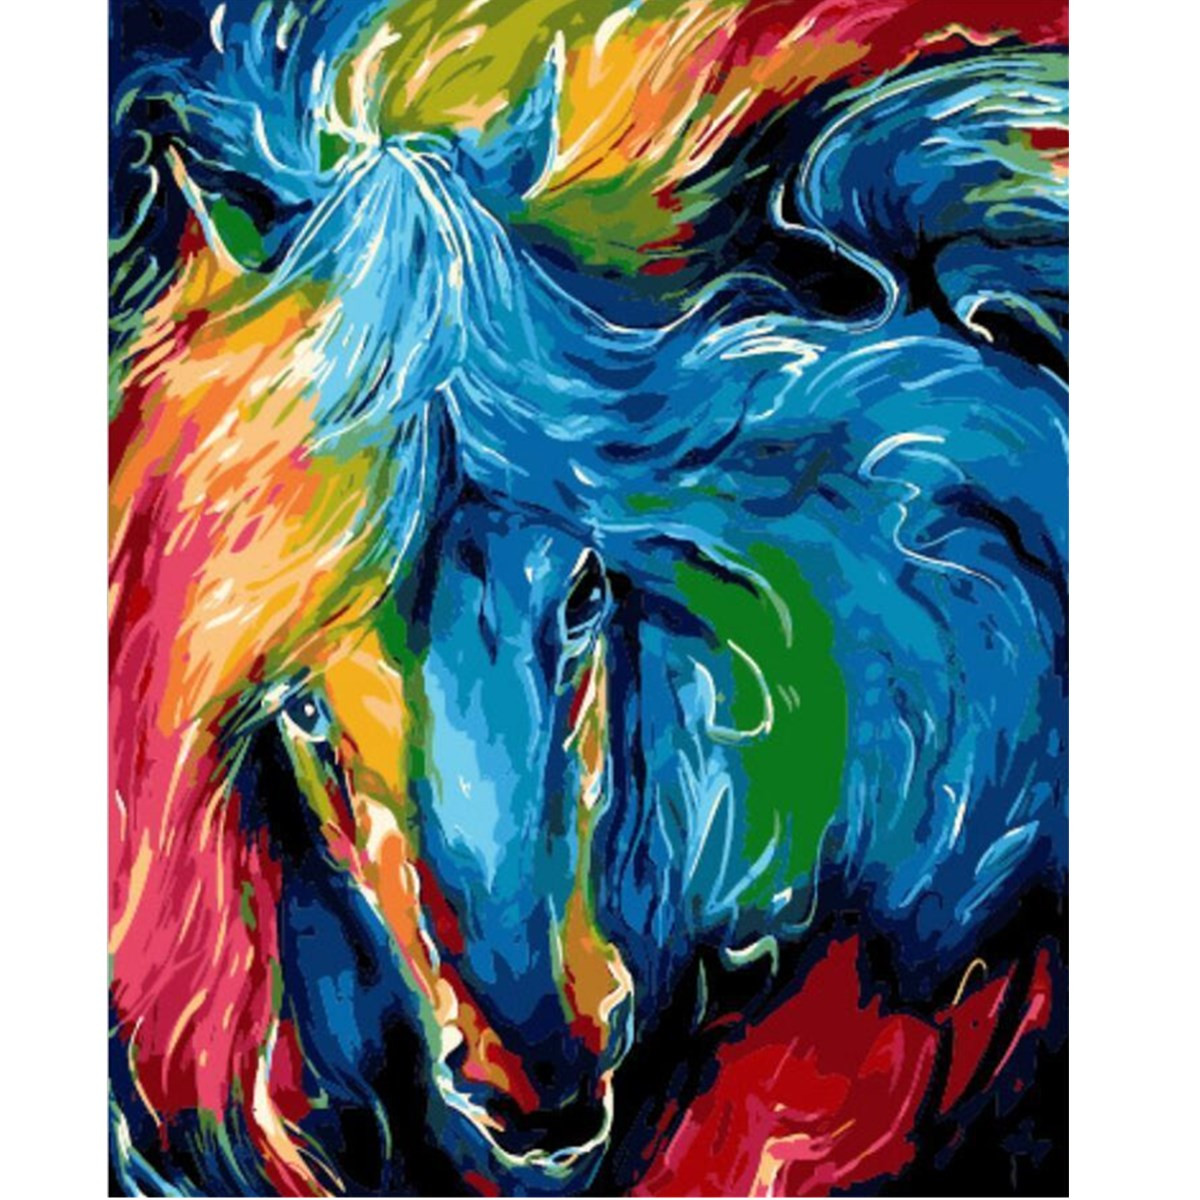 DIY-Oil-Painting-By-Number-Kit-Colorful-Horse-Painting-Acrylic-Pigment-Painting-By-Numbers-Set-Hand--1752939-2